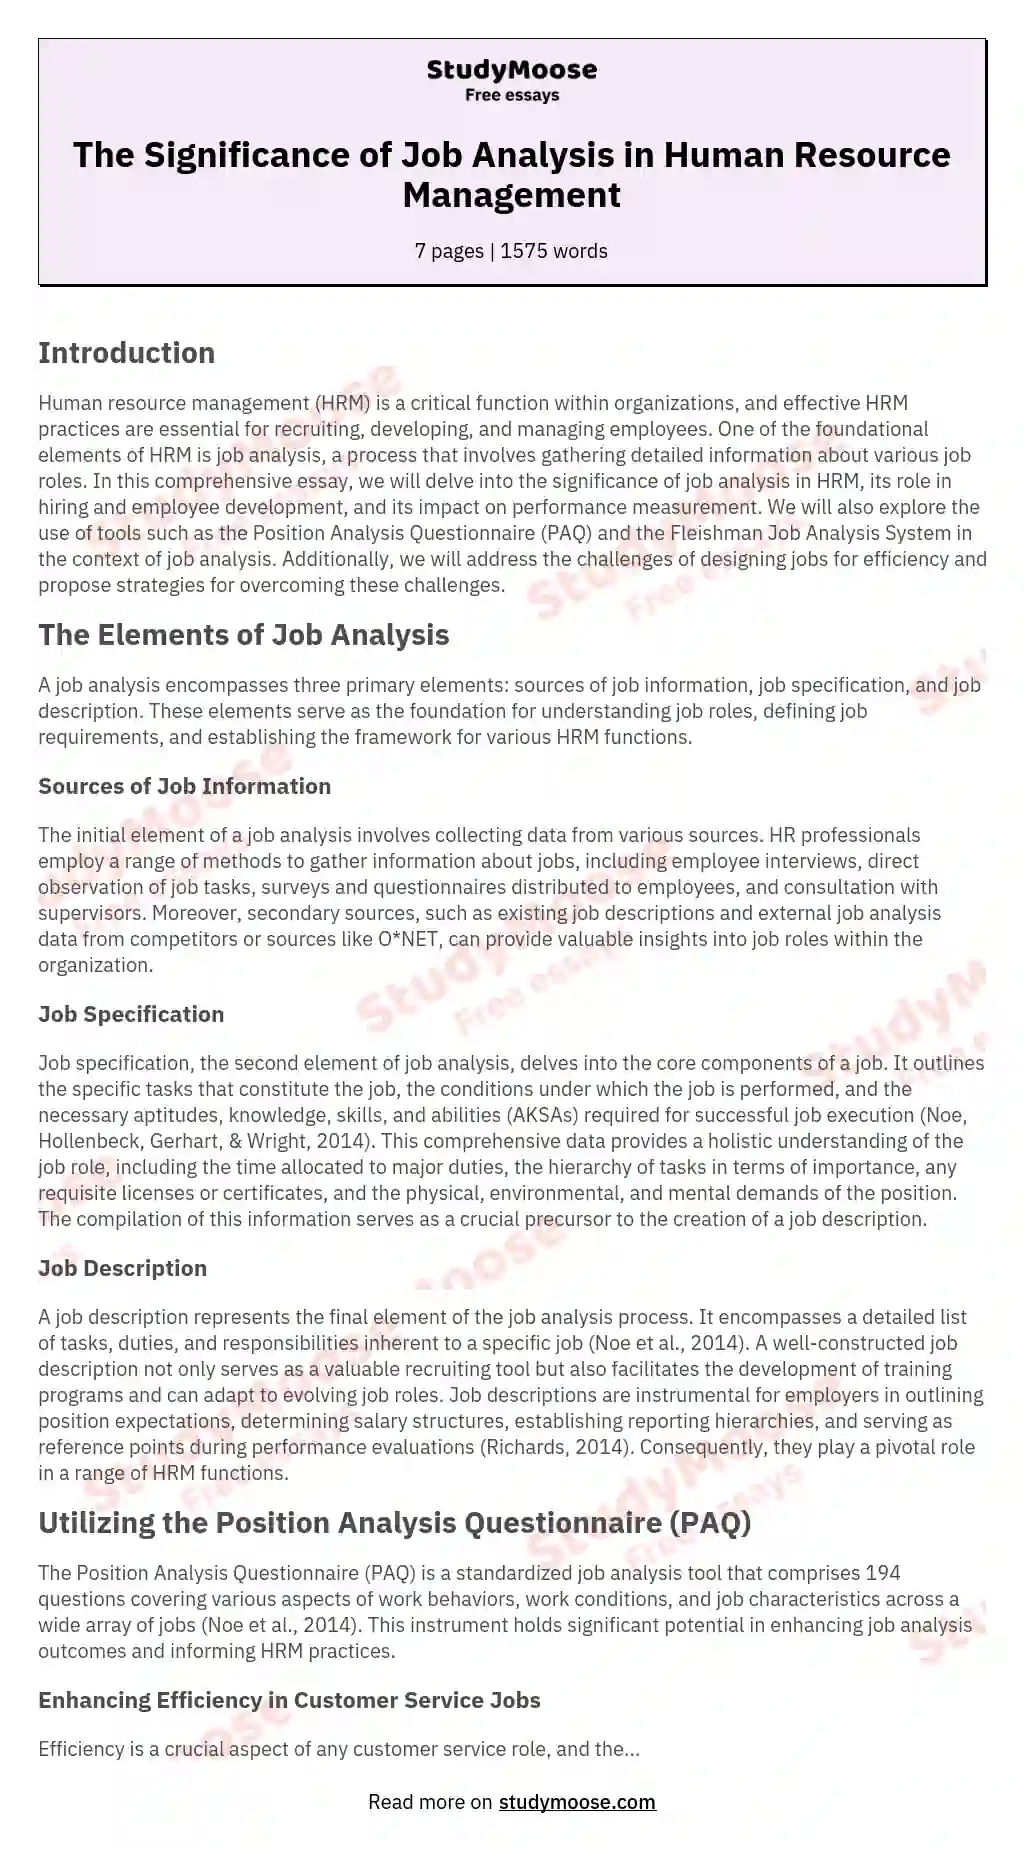 The Significance of Job Analysis in Human Resource Management essay